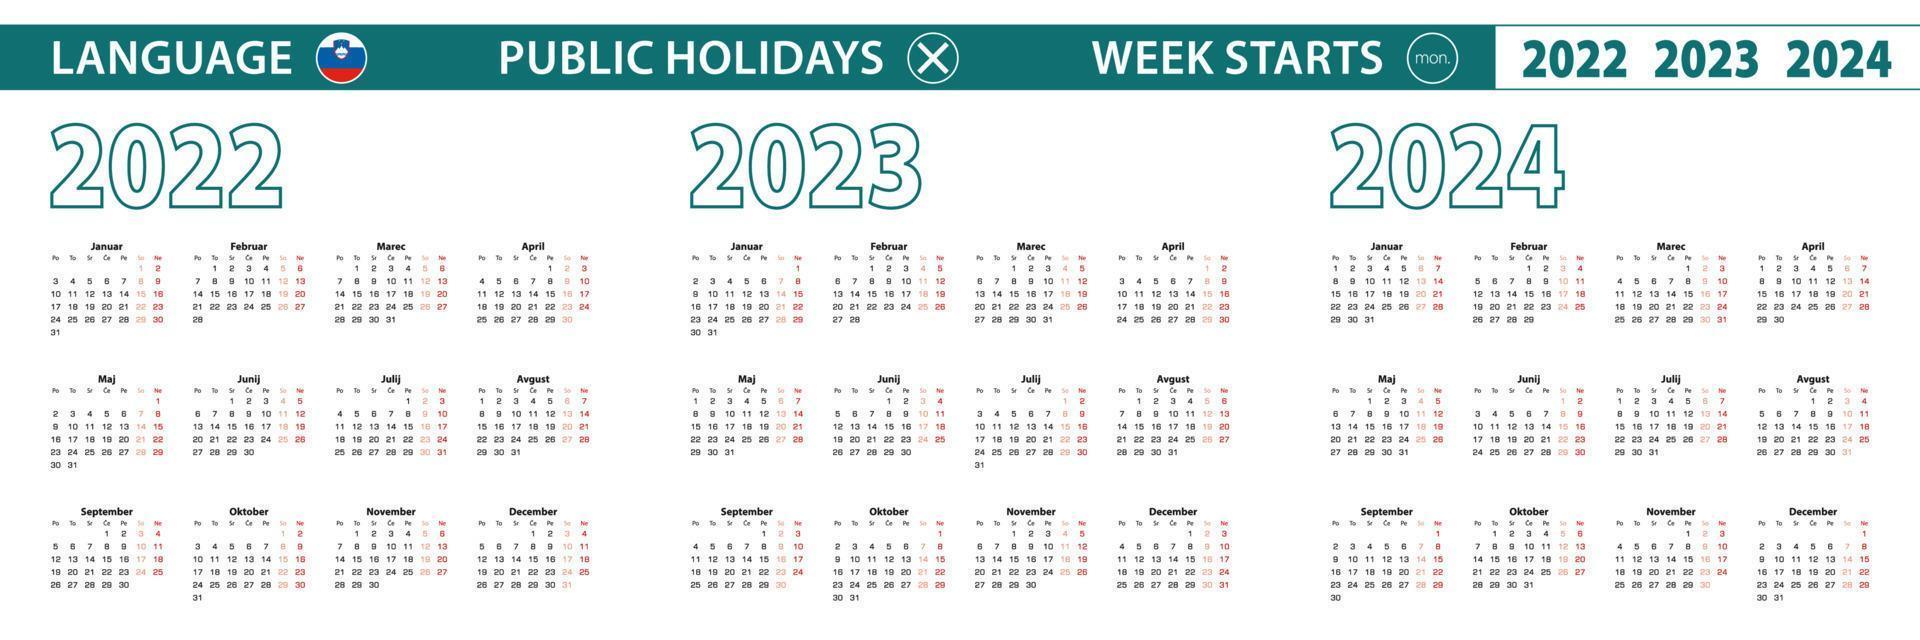 Simple calendar template in Slovenian for 2022, 2023, 2024 years. Week starts from Monday. vector